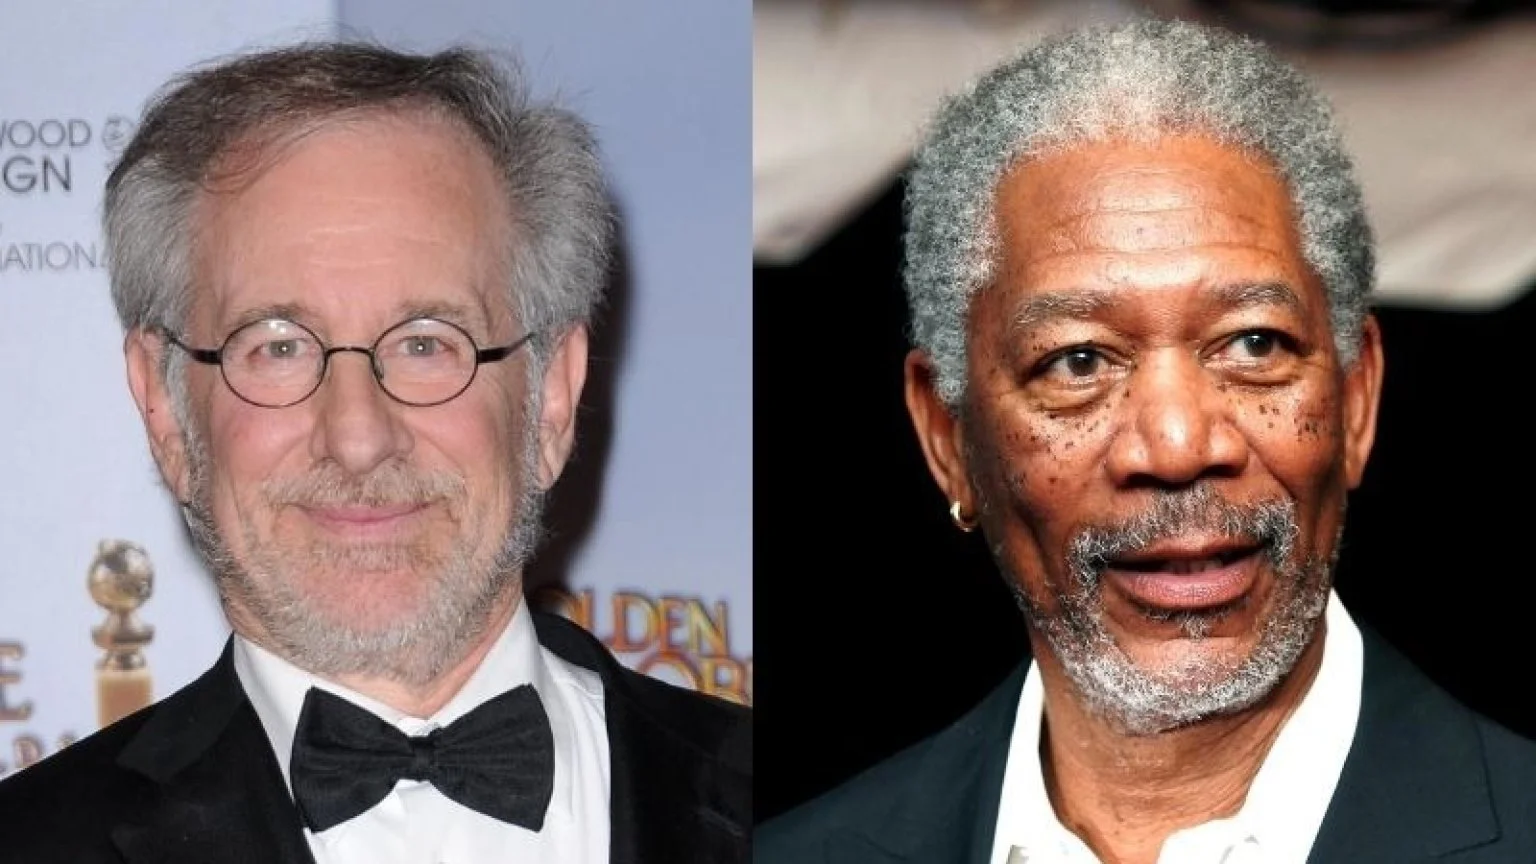 Morgan Freeman's Voice Turns 'War of the Worlds' Into a Hit: Inside Spielberg's Feud With Tom Cruise